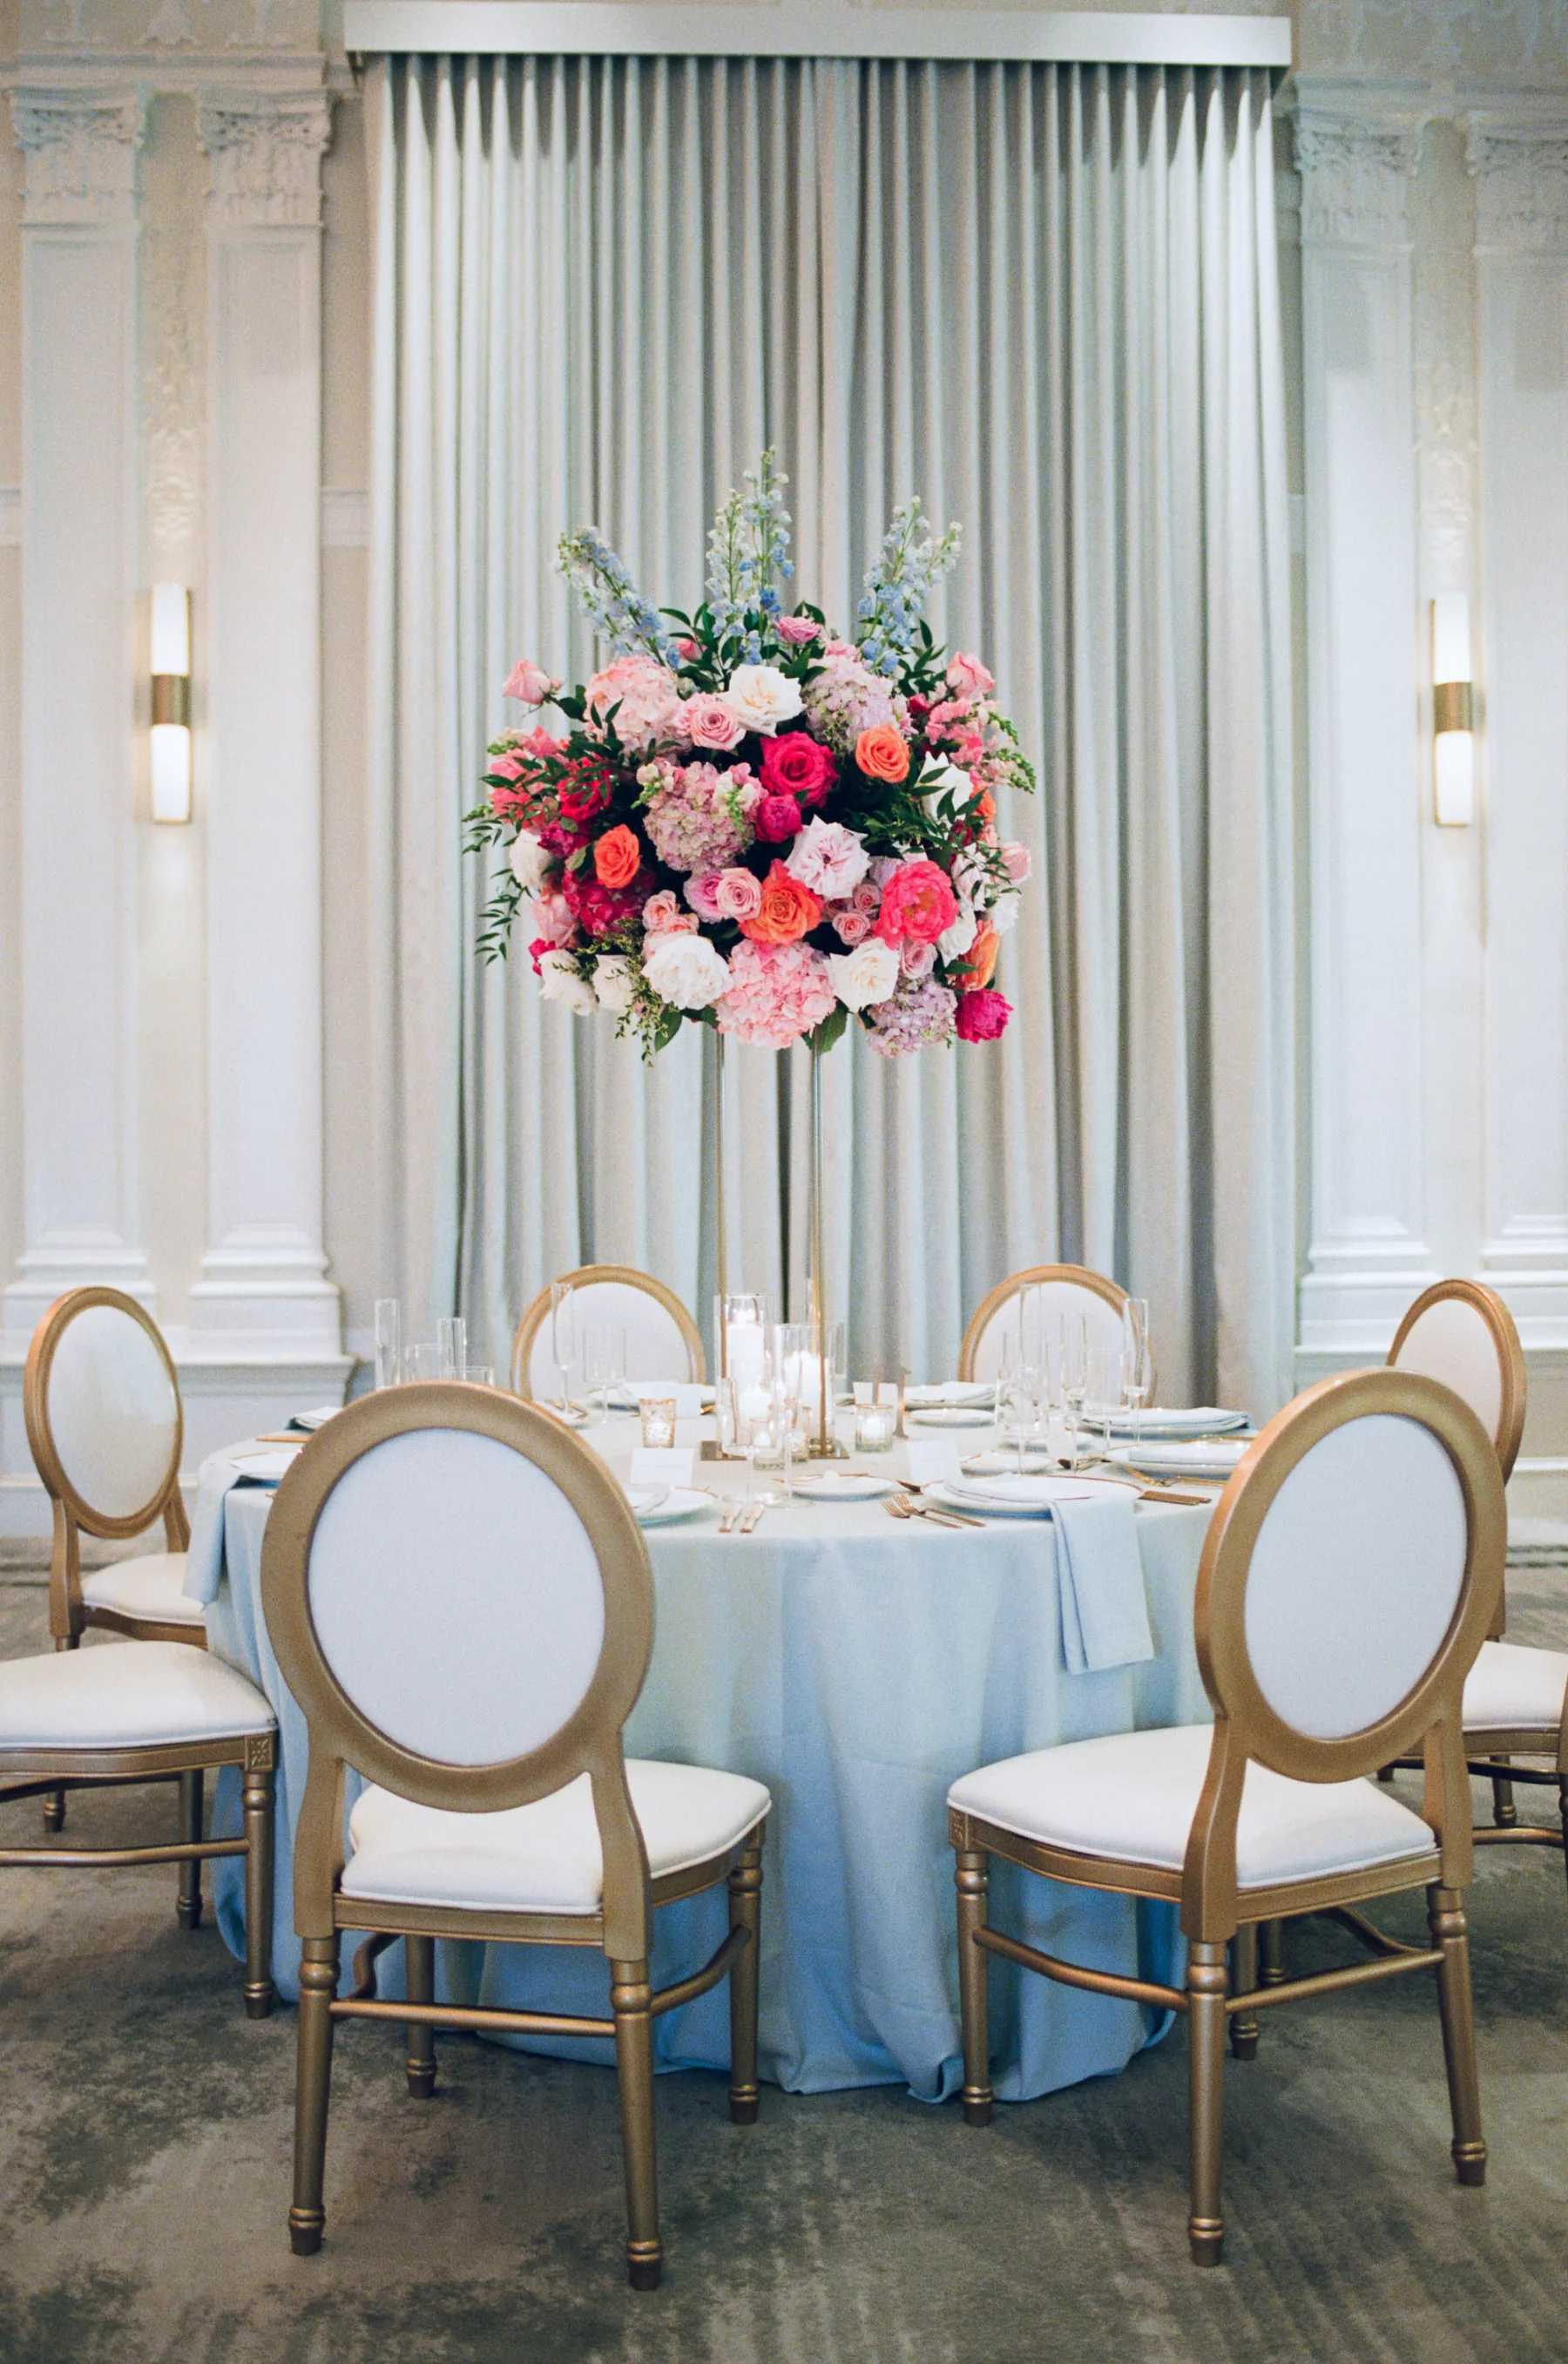 Luxurious Pink and Blue Wedding Reception Tablescape Ideas | Tall Flower Stand with Pink Anemones and Hydrangeas, Orange Garden Roses, Blue Stock Flowers | Gold and White Chairs | Tampa Bay Florist Bruce Wayne Florals | Kate Ryan Event Rentals